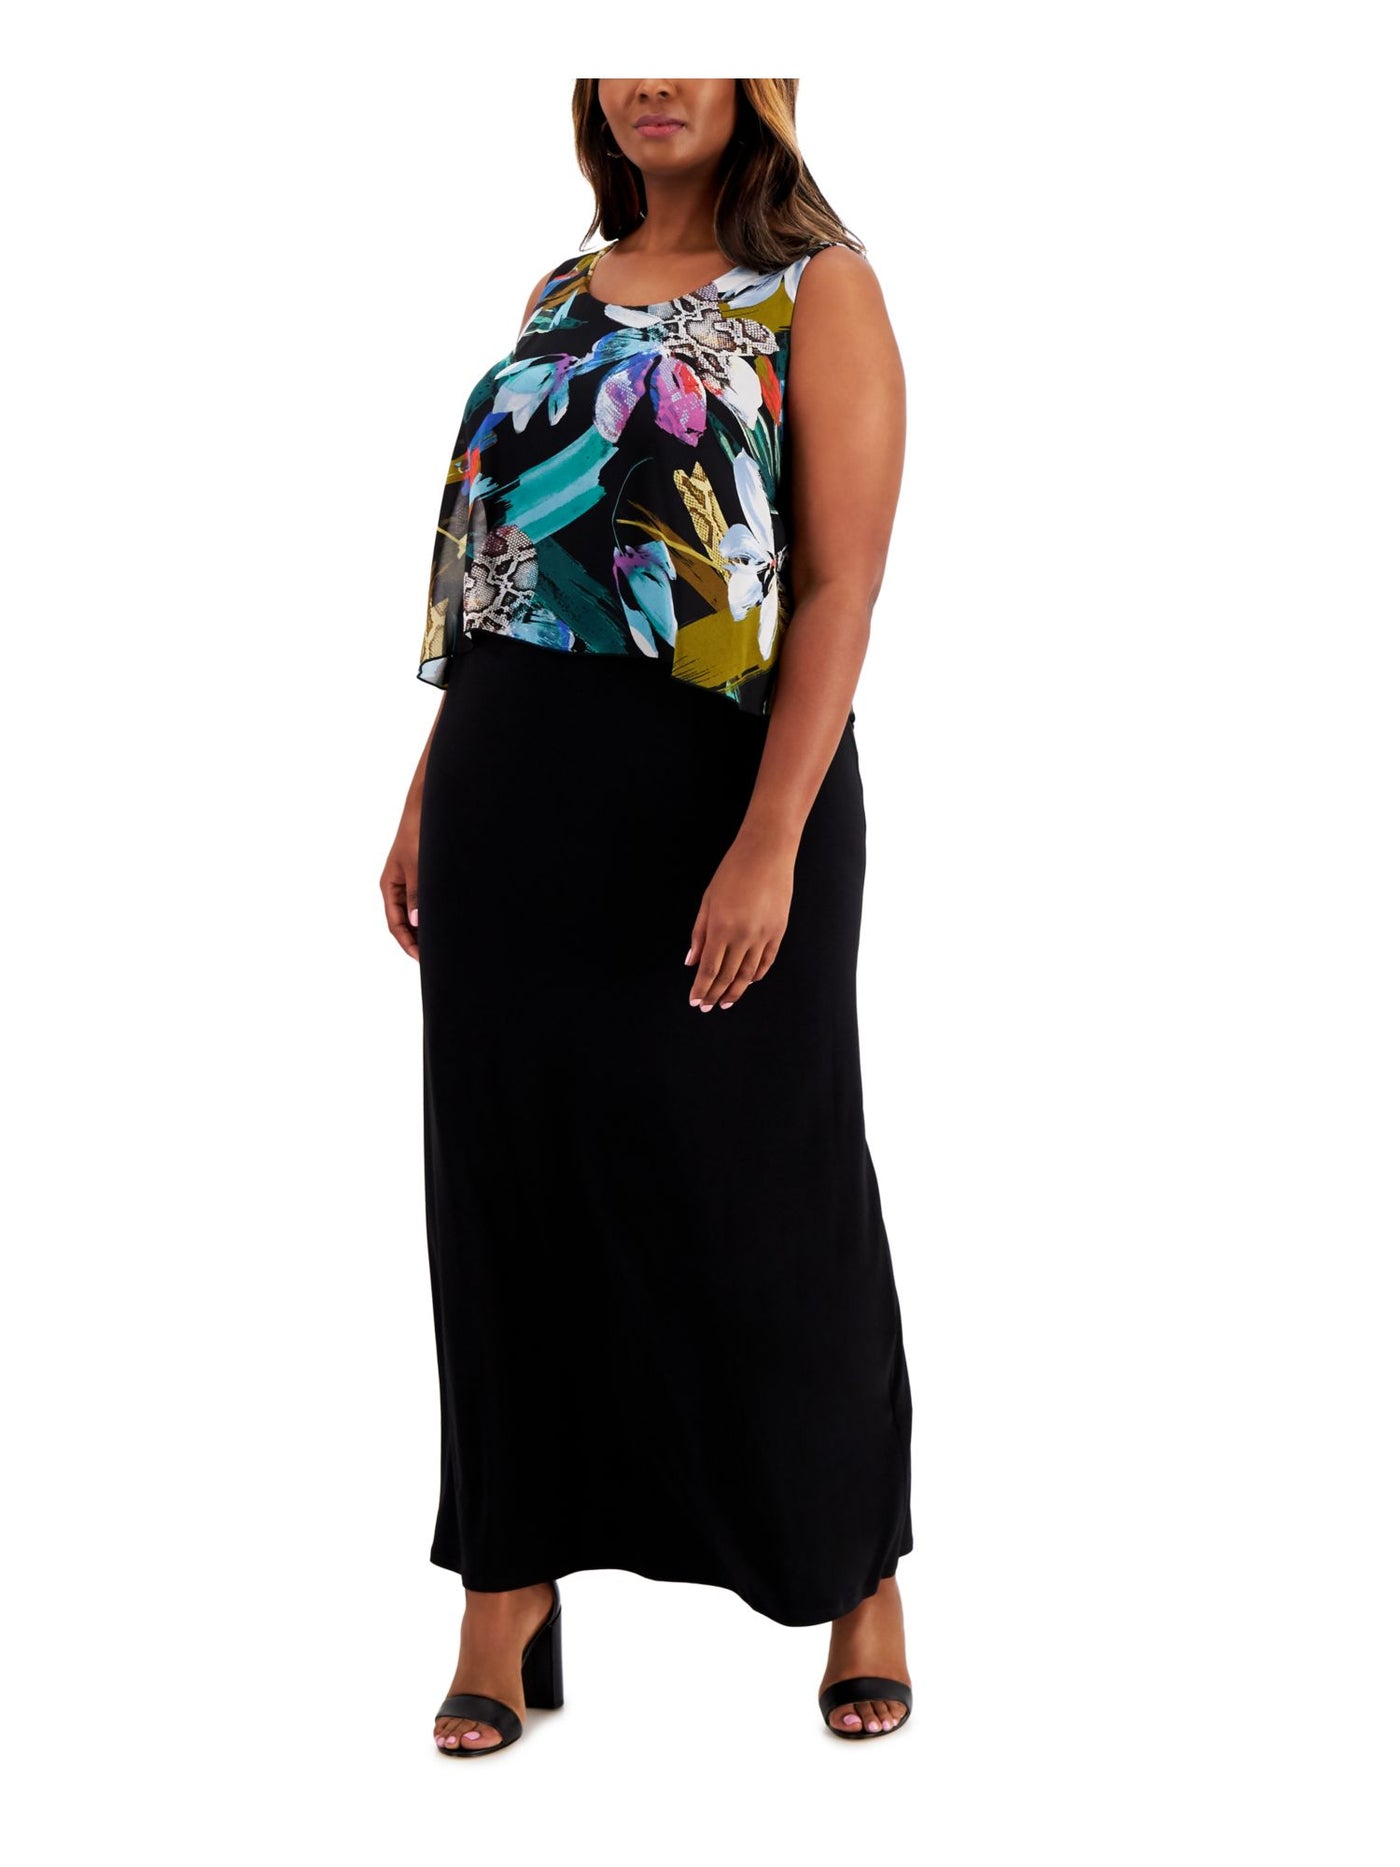 CONNECTED APPAREL Womens Black Stretch Printed Sleeveless Scoop Neck Maxi Evening Dress Plus 14W